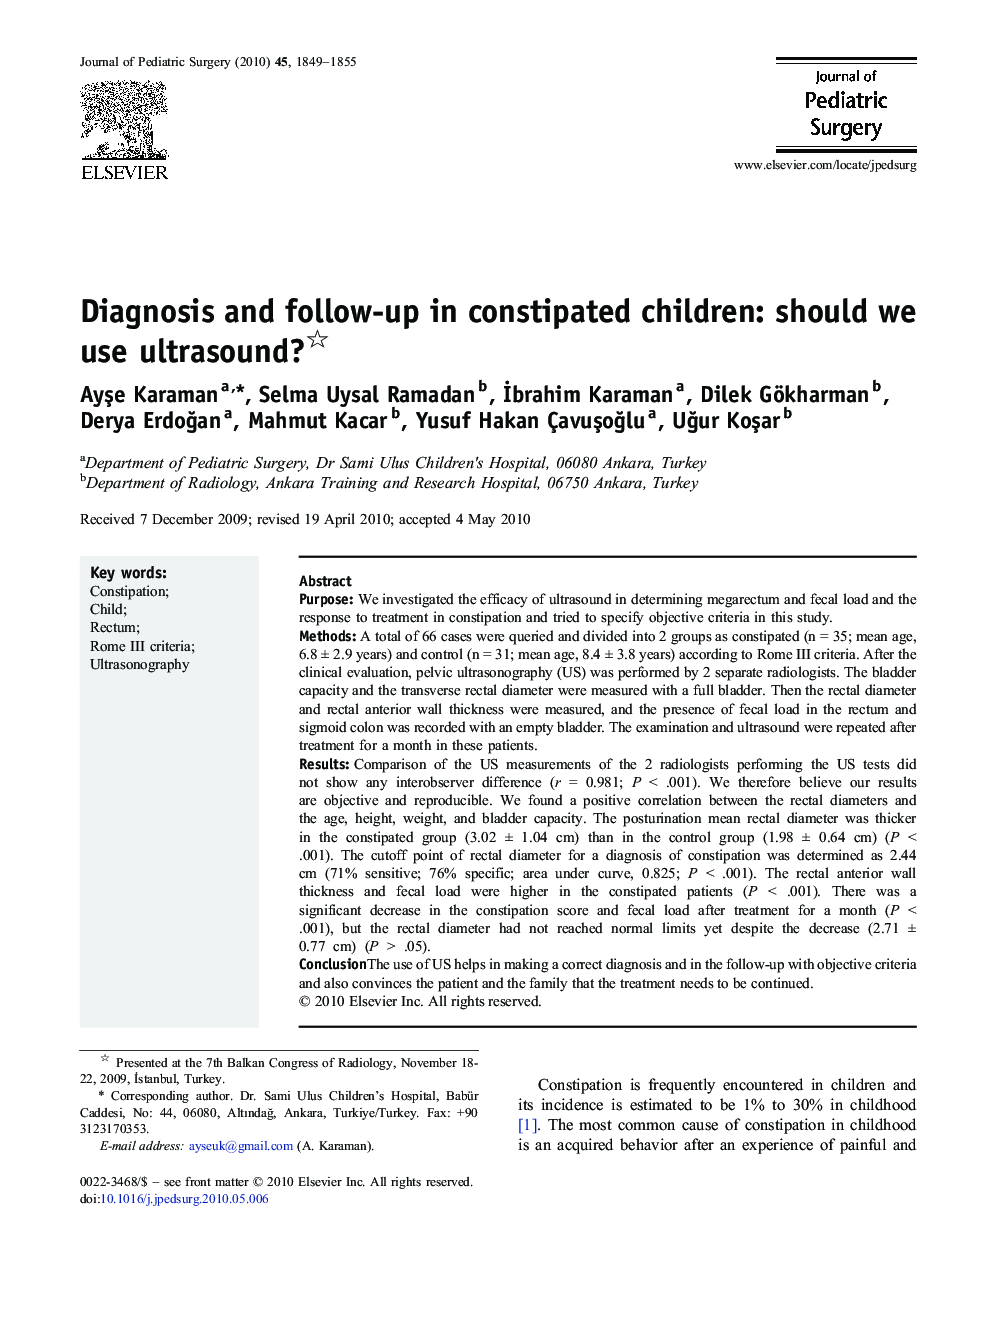 Diagnosis and follow-up in constipated children: should we use ultrasound? 